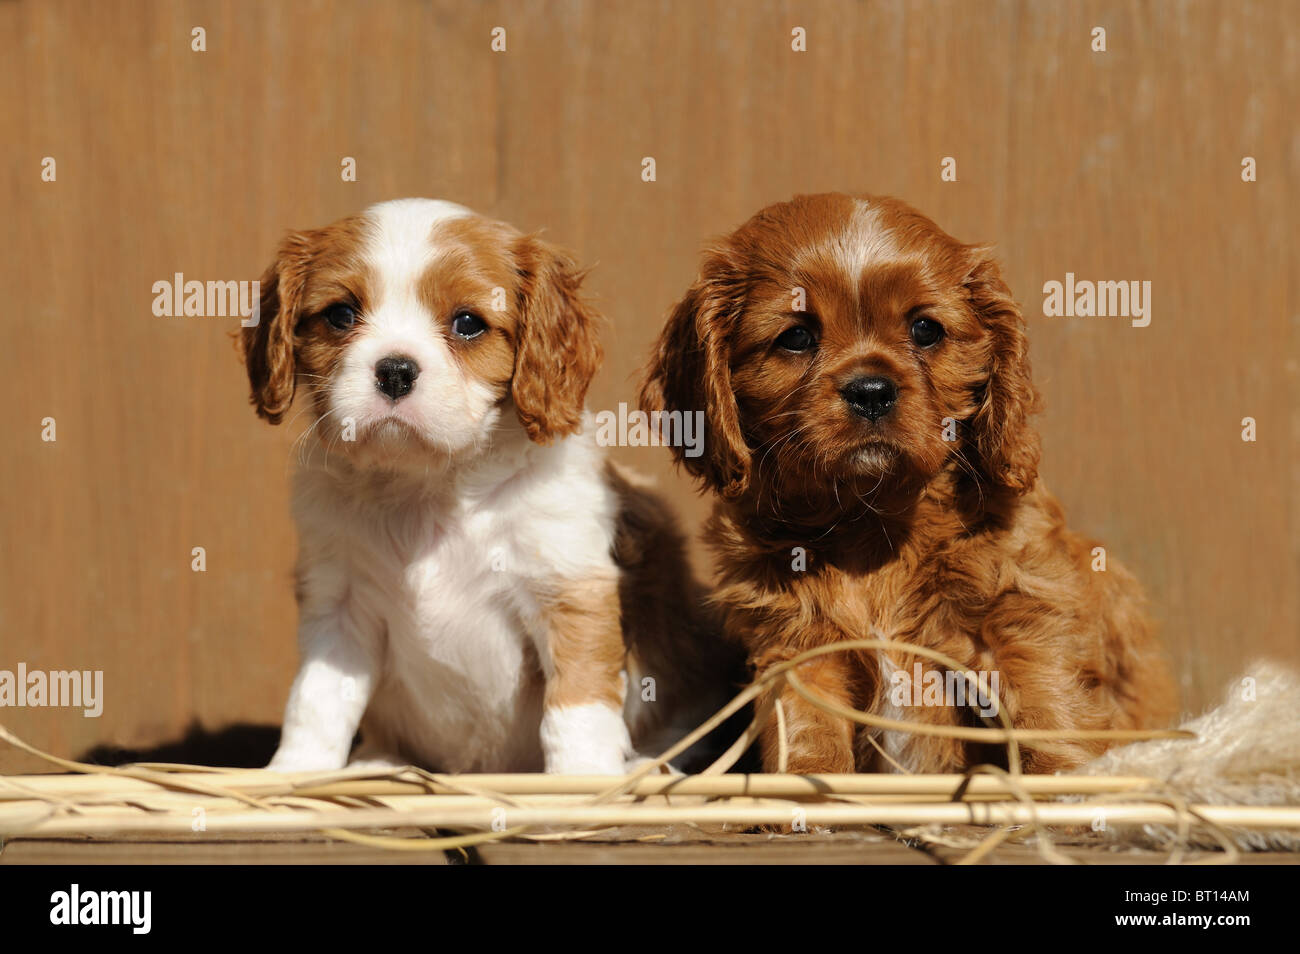 Cavalier King Charles Spaniel (Canis lupus familiaris), two puppies sitting on a bench. Stock Photo